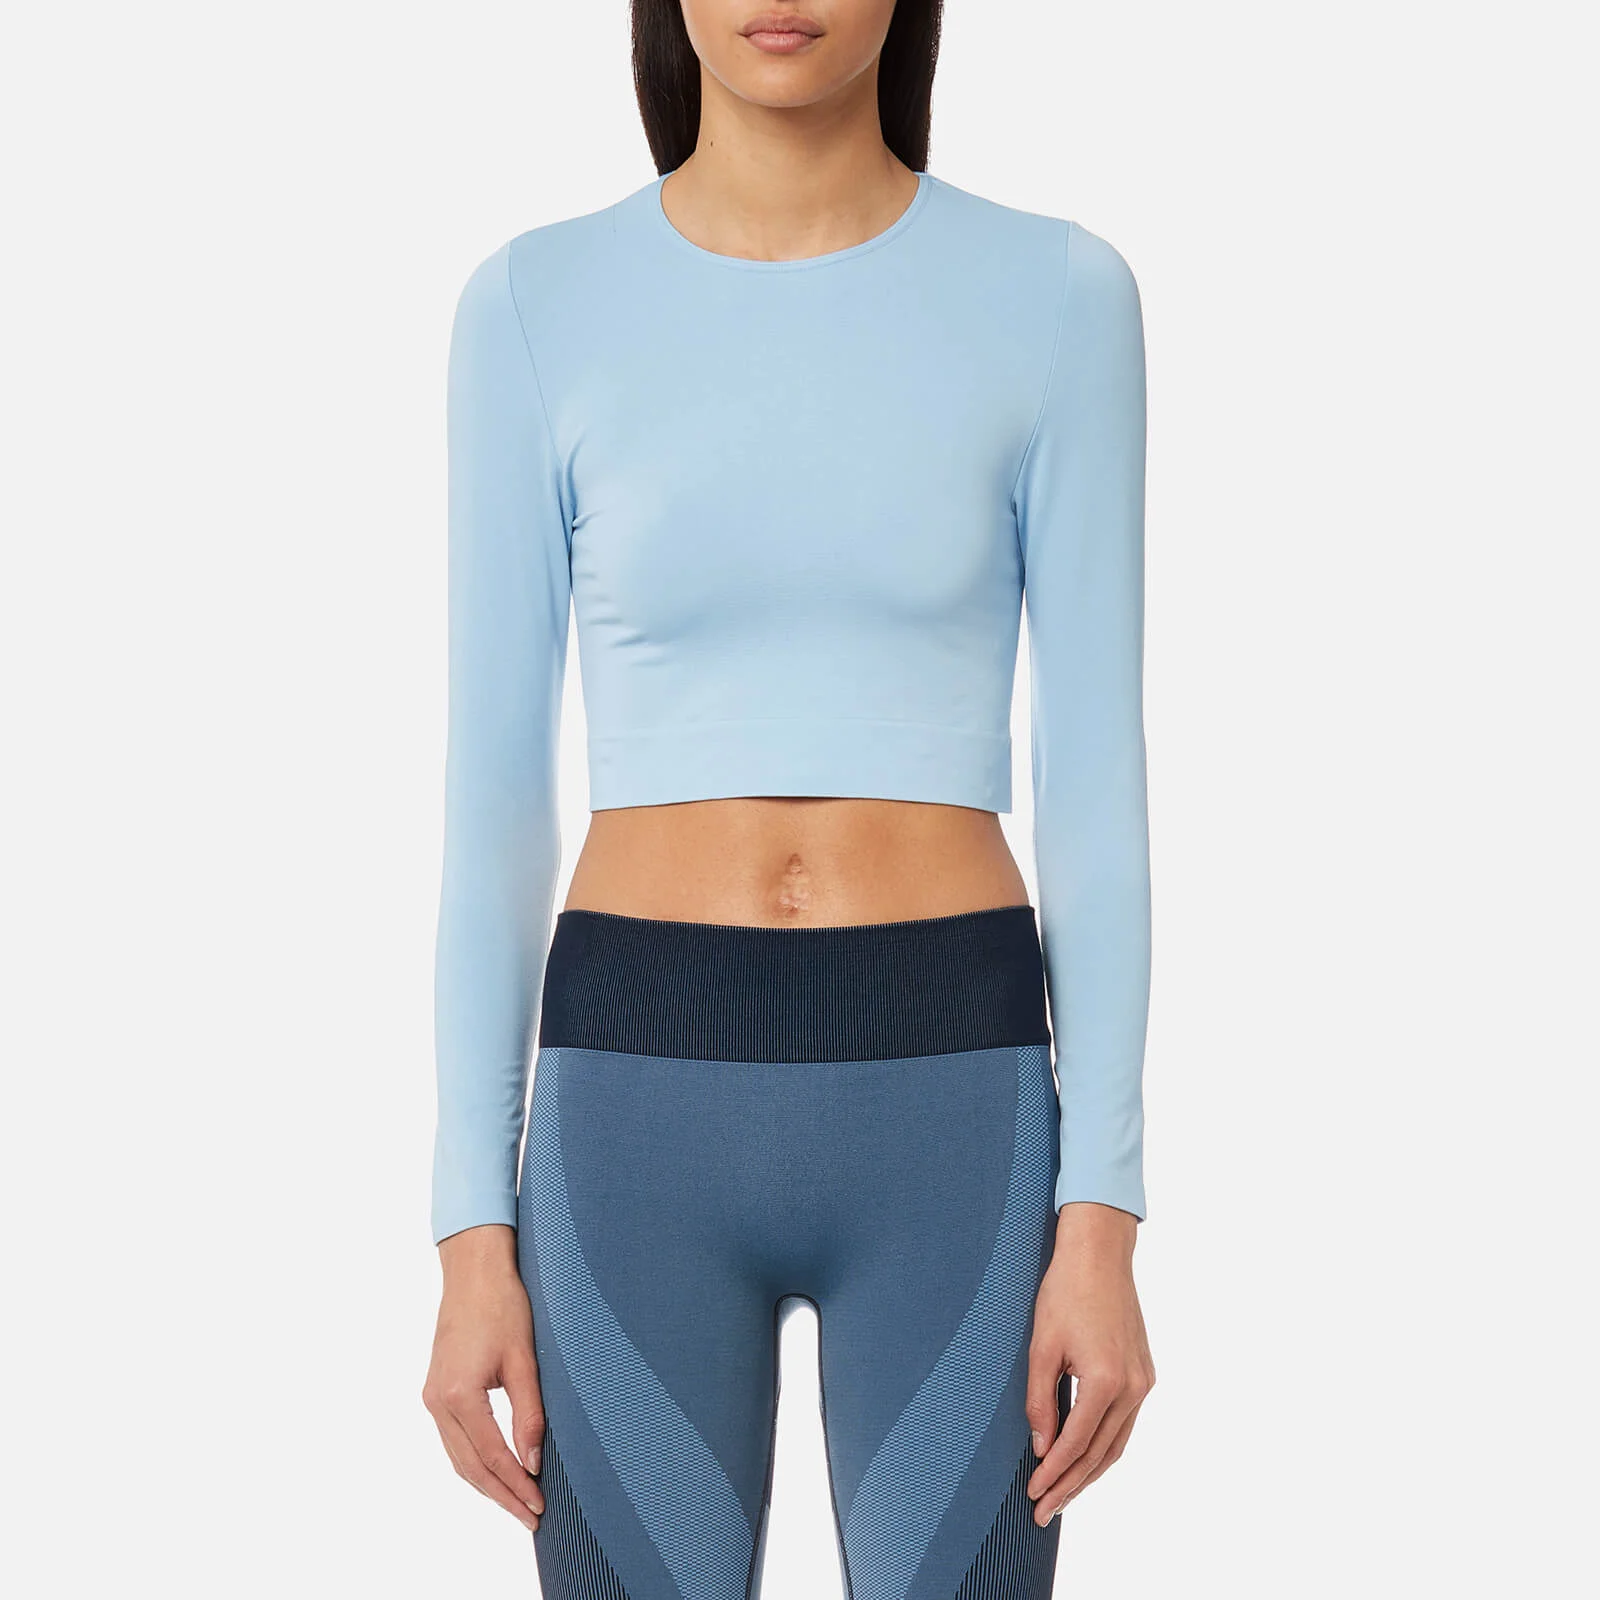 Varley Women's Vermont Long Sleeve Cropped Top - Powder Blue Image 1